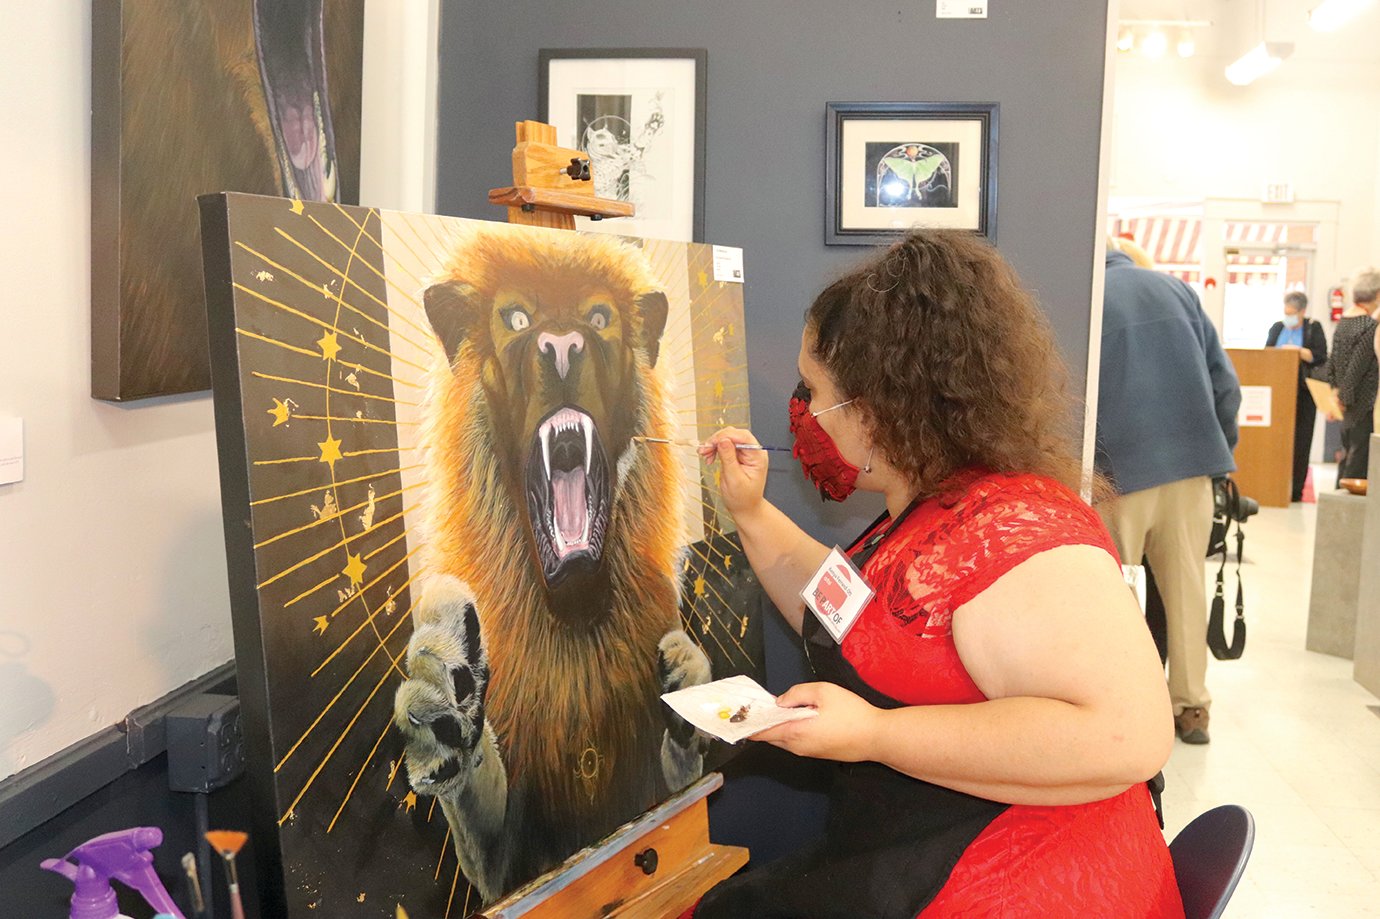 Athens Arts Gallery member artist Kenya Ferrand-Ott paints a manticore Sunday during an open house and fundraiser for the studio.